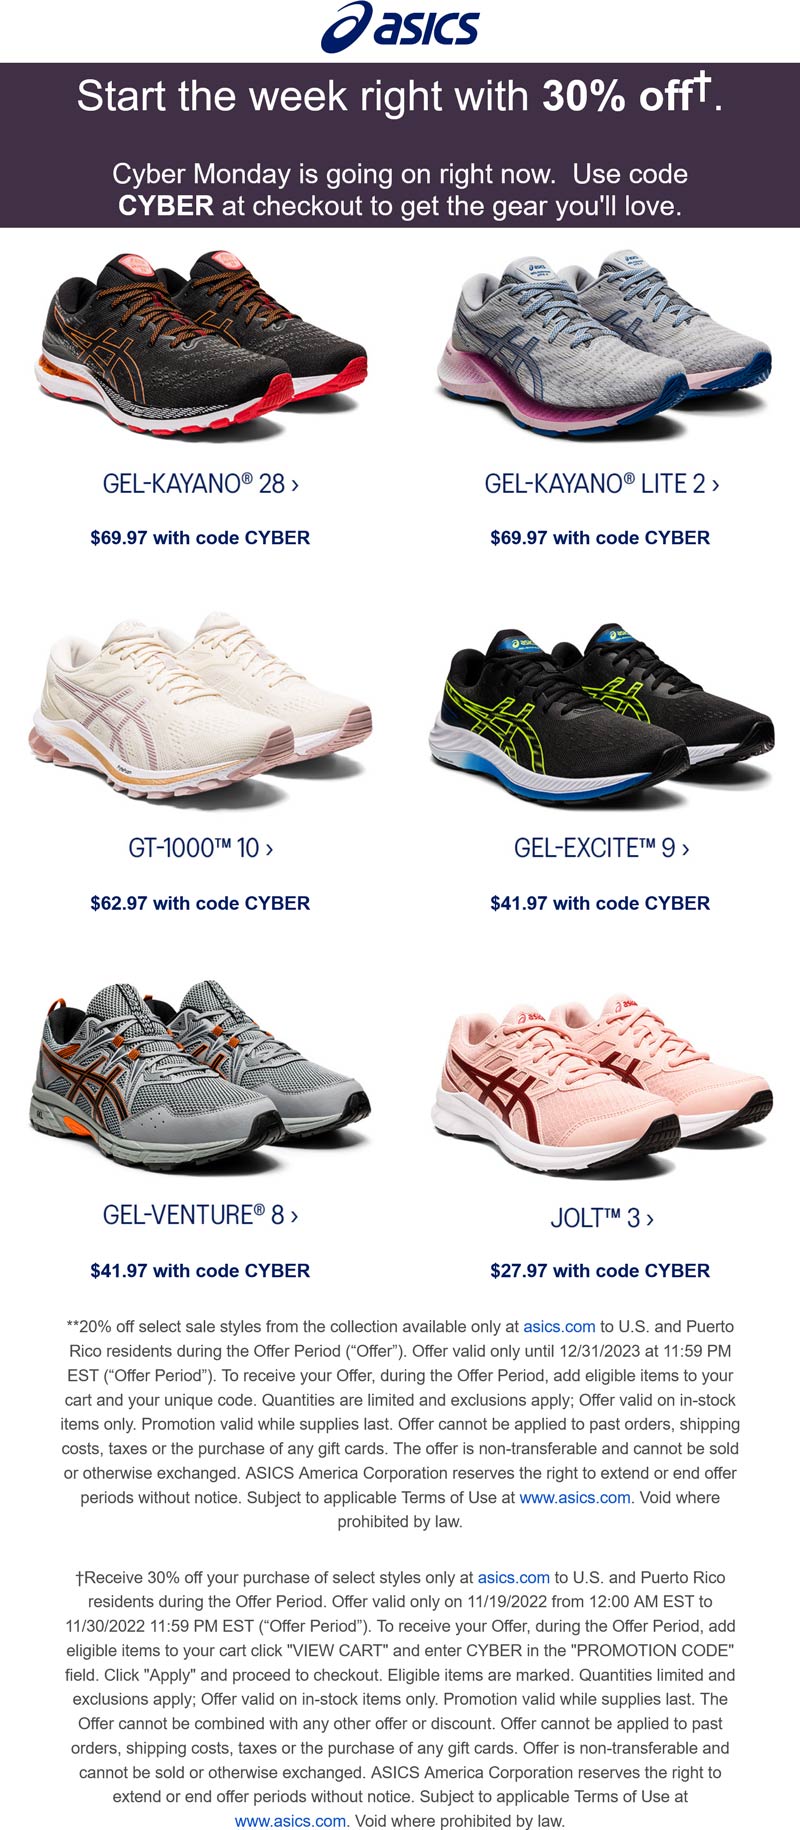 Asics coupons & promo code for [January 2023]